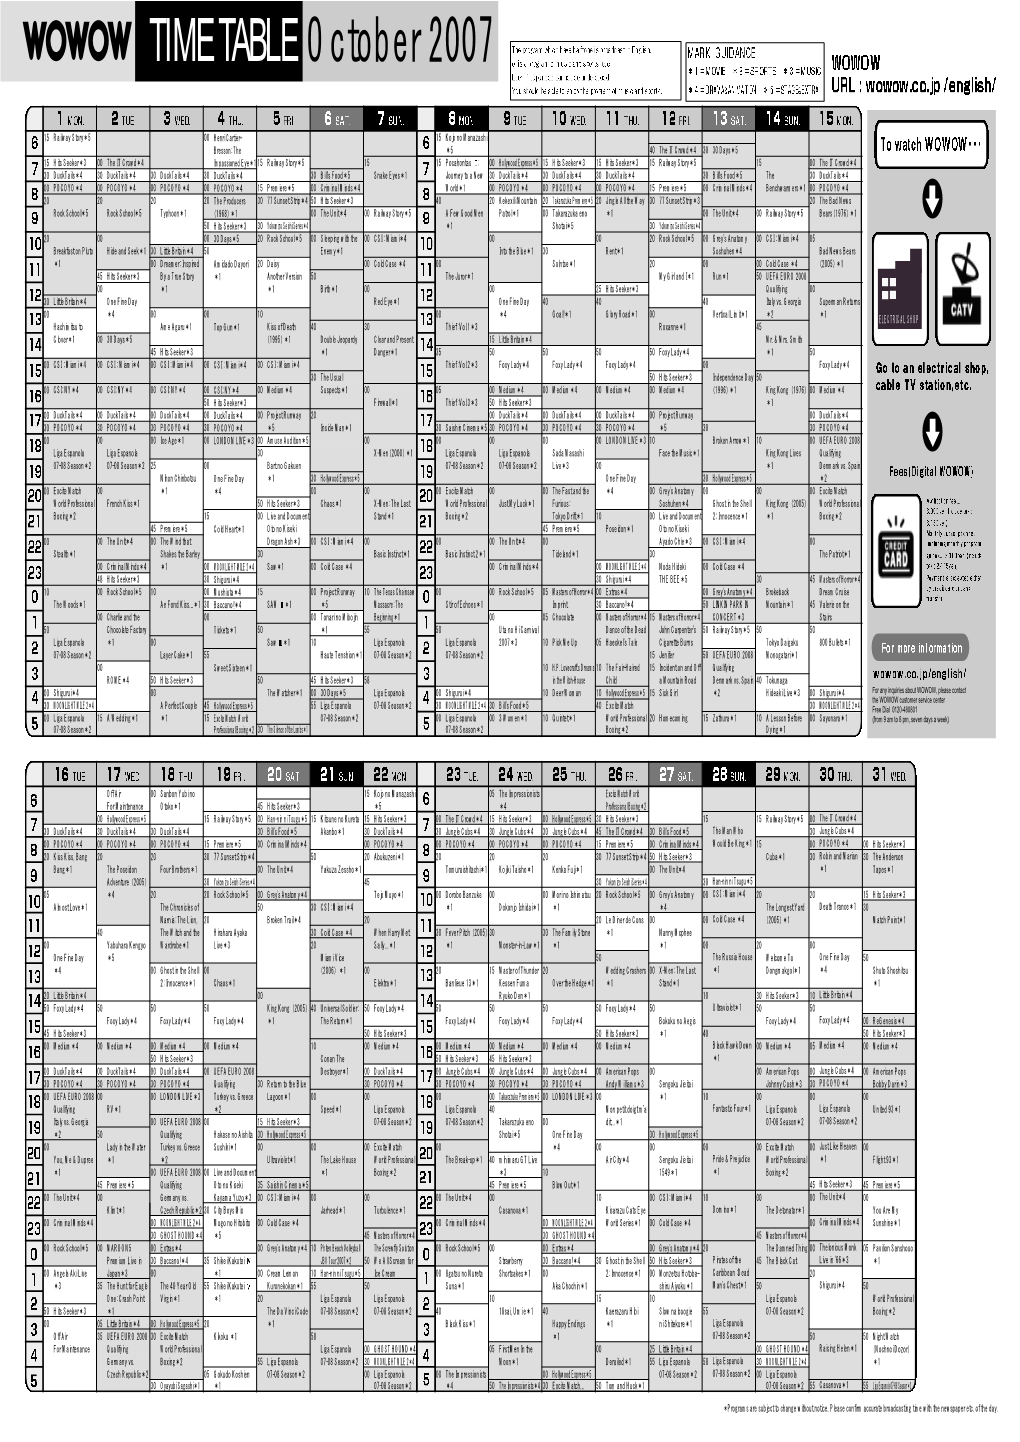 October 2007 TIME TABLE